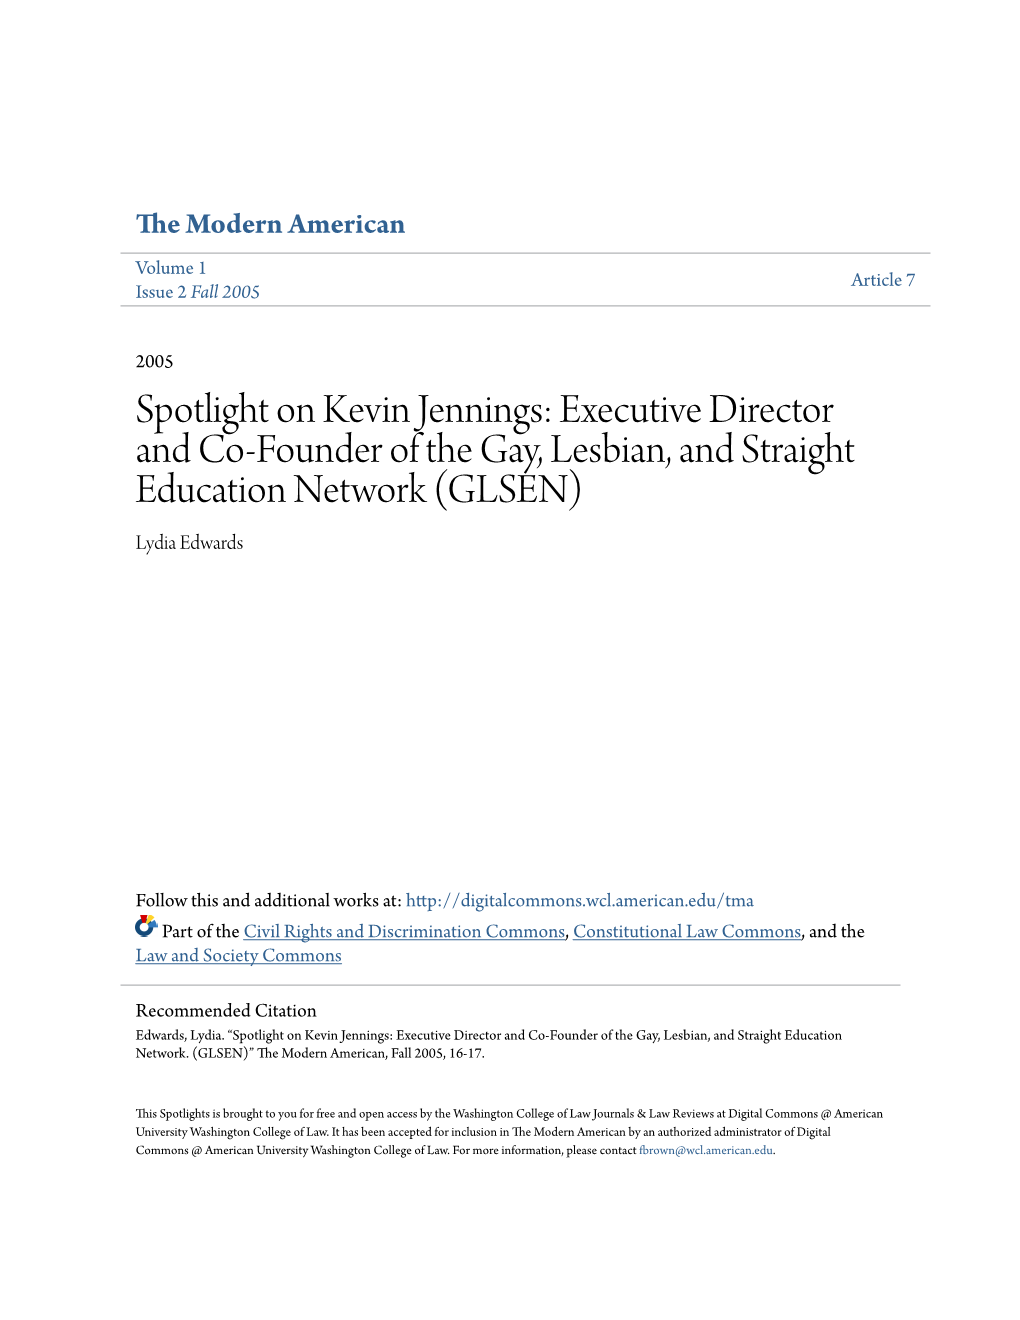 Spotlight on Kevin Jennings: Executive Director and Co-Founder of the Gay, Lesbian, and Straight Education Network (GLSEN) Lydia Edwards